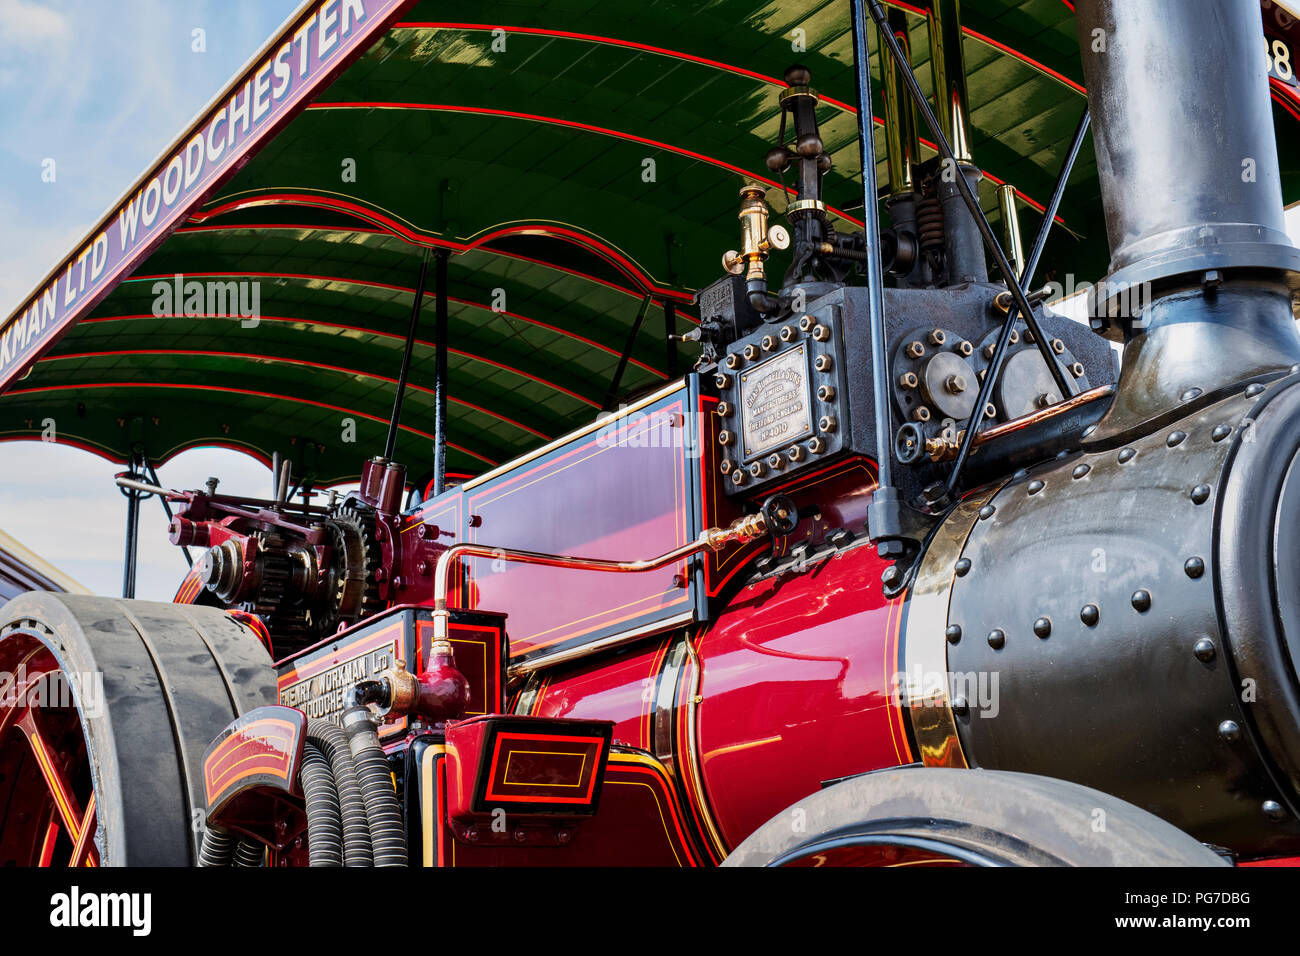 Burrell traction engine at a steam fair in England Stock Photo